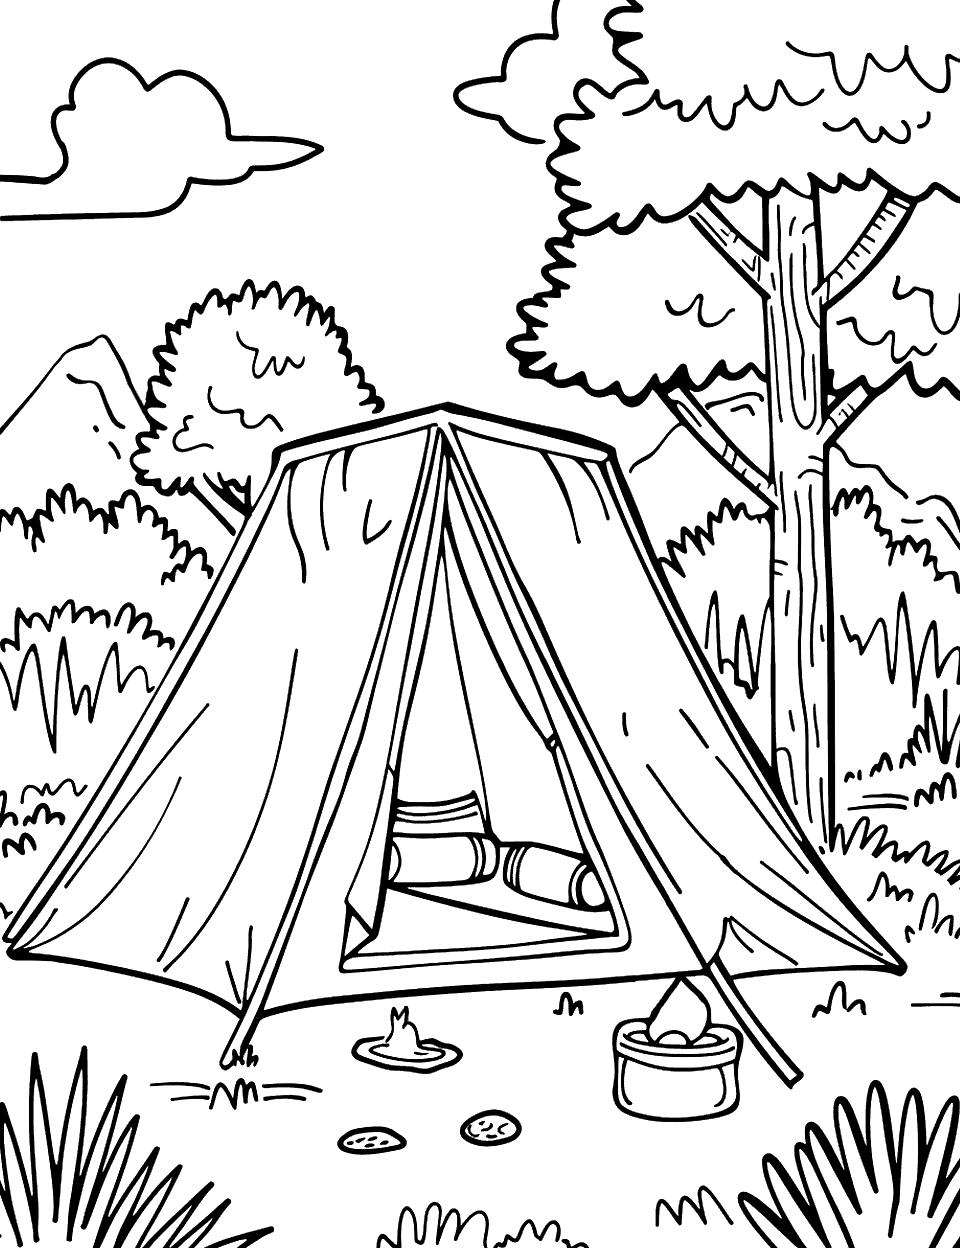 Basic Campsite Camping Coloring Page - A basic outline of a campsite scene, suitable for easy coloring.